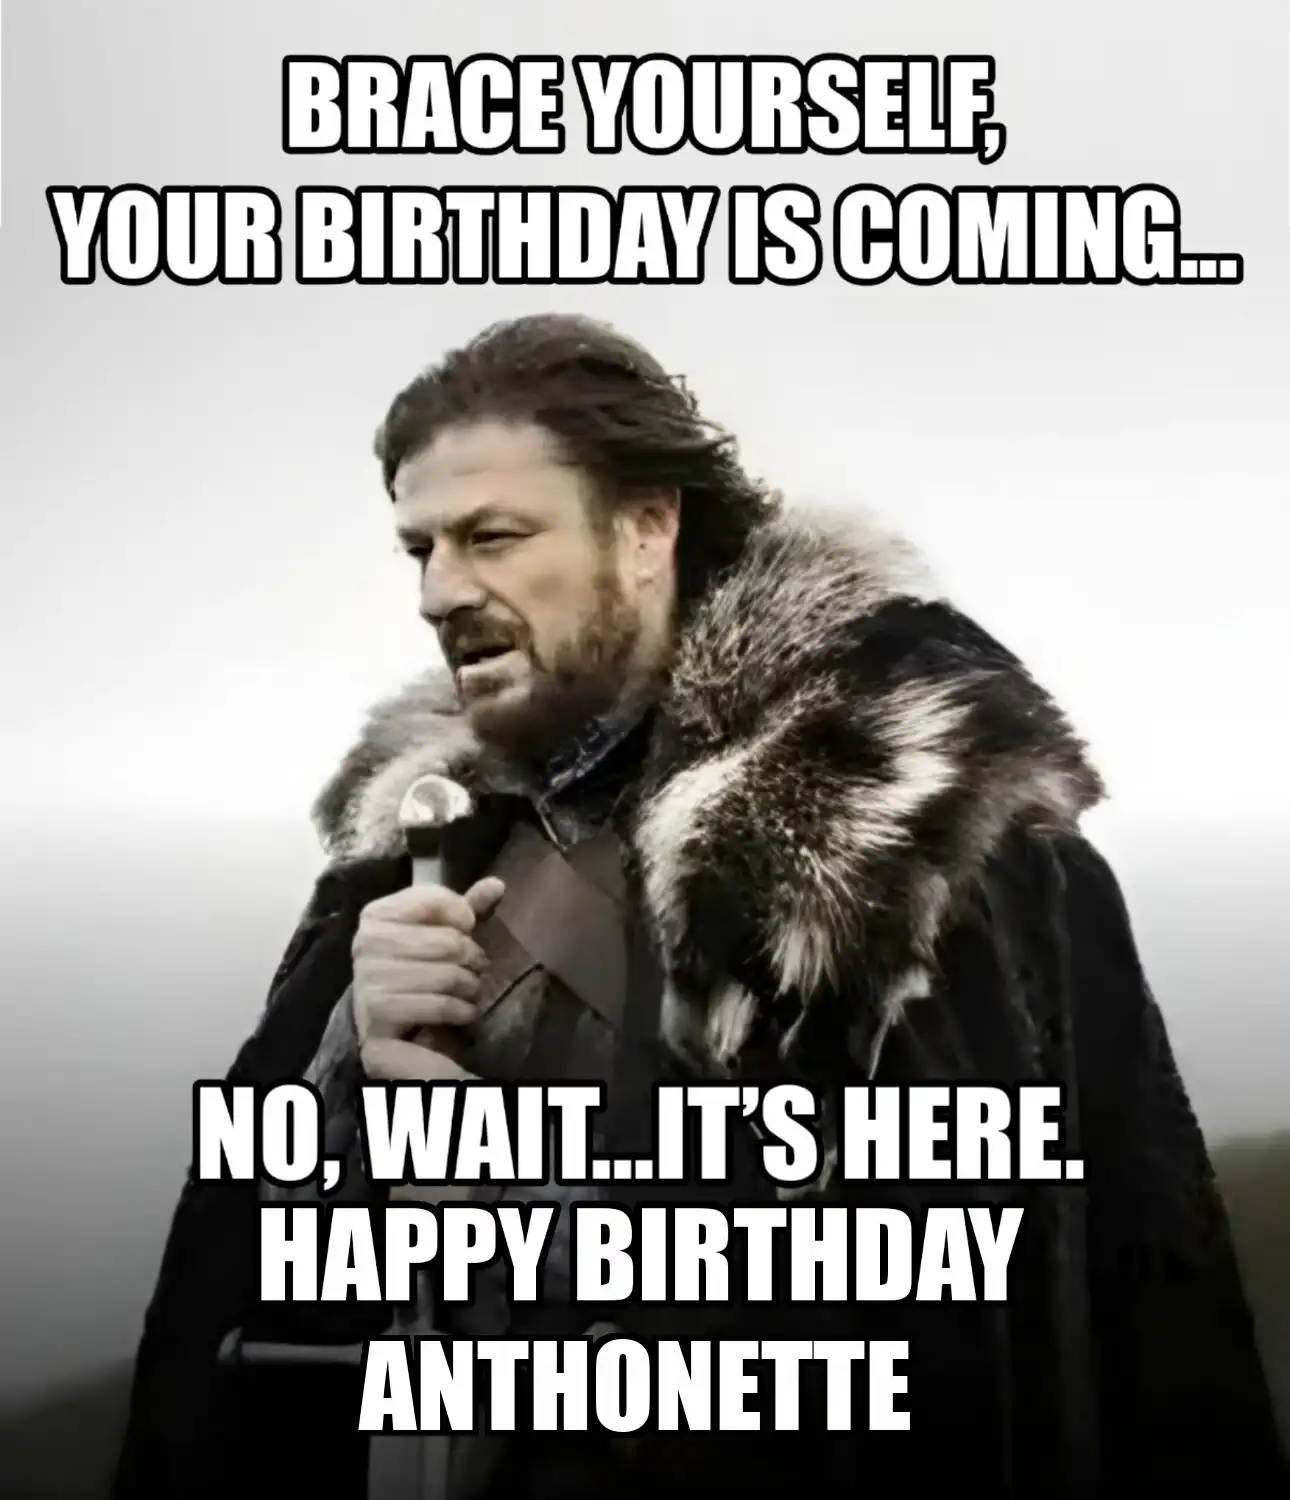 Happy Birthday Anthonette Brace Yourself Your Birthday Is Coming Meme